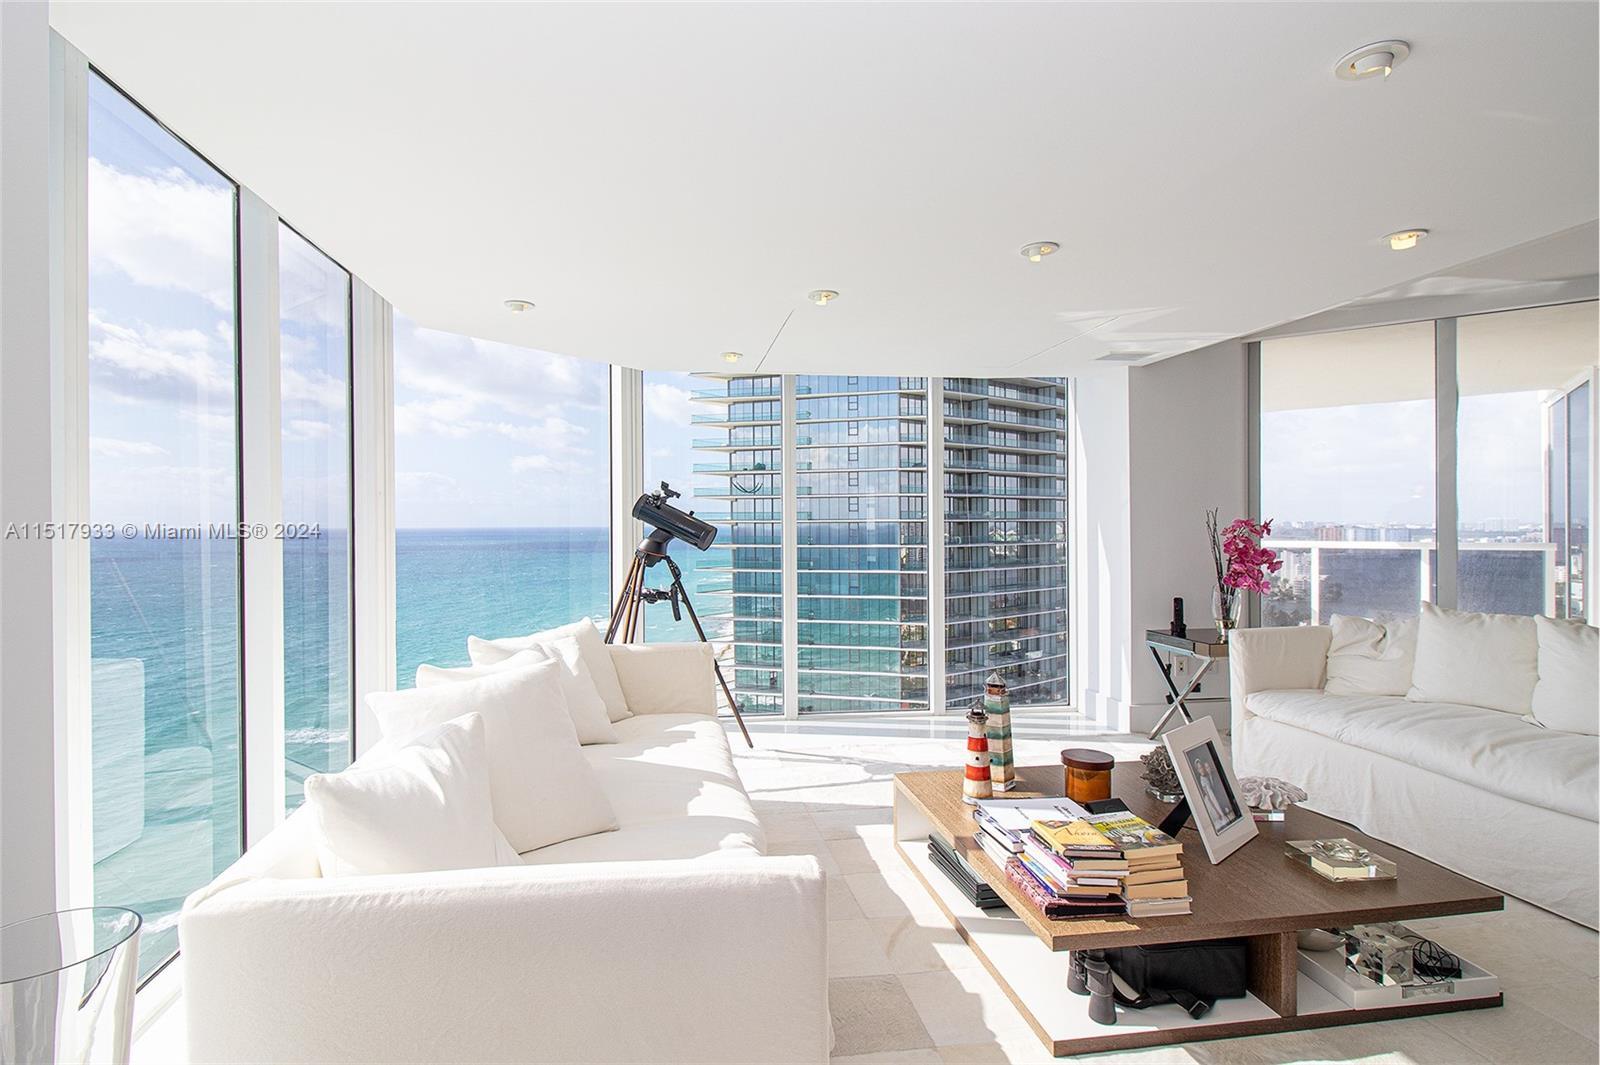 Look No Further! Dream Beachfront Condo on the 28th floor in Sunny Isles Beach:
This 2,660 sq ft un